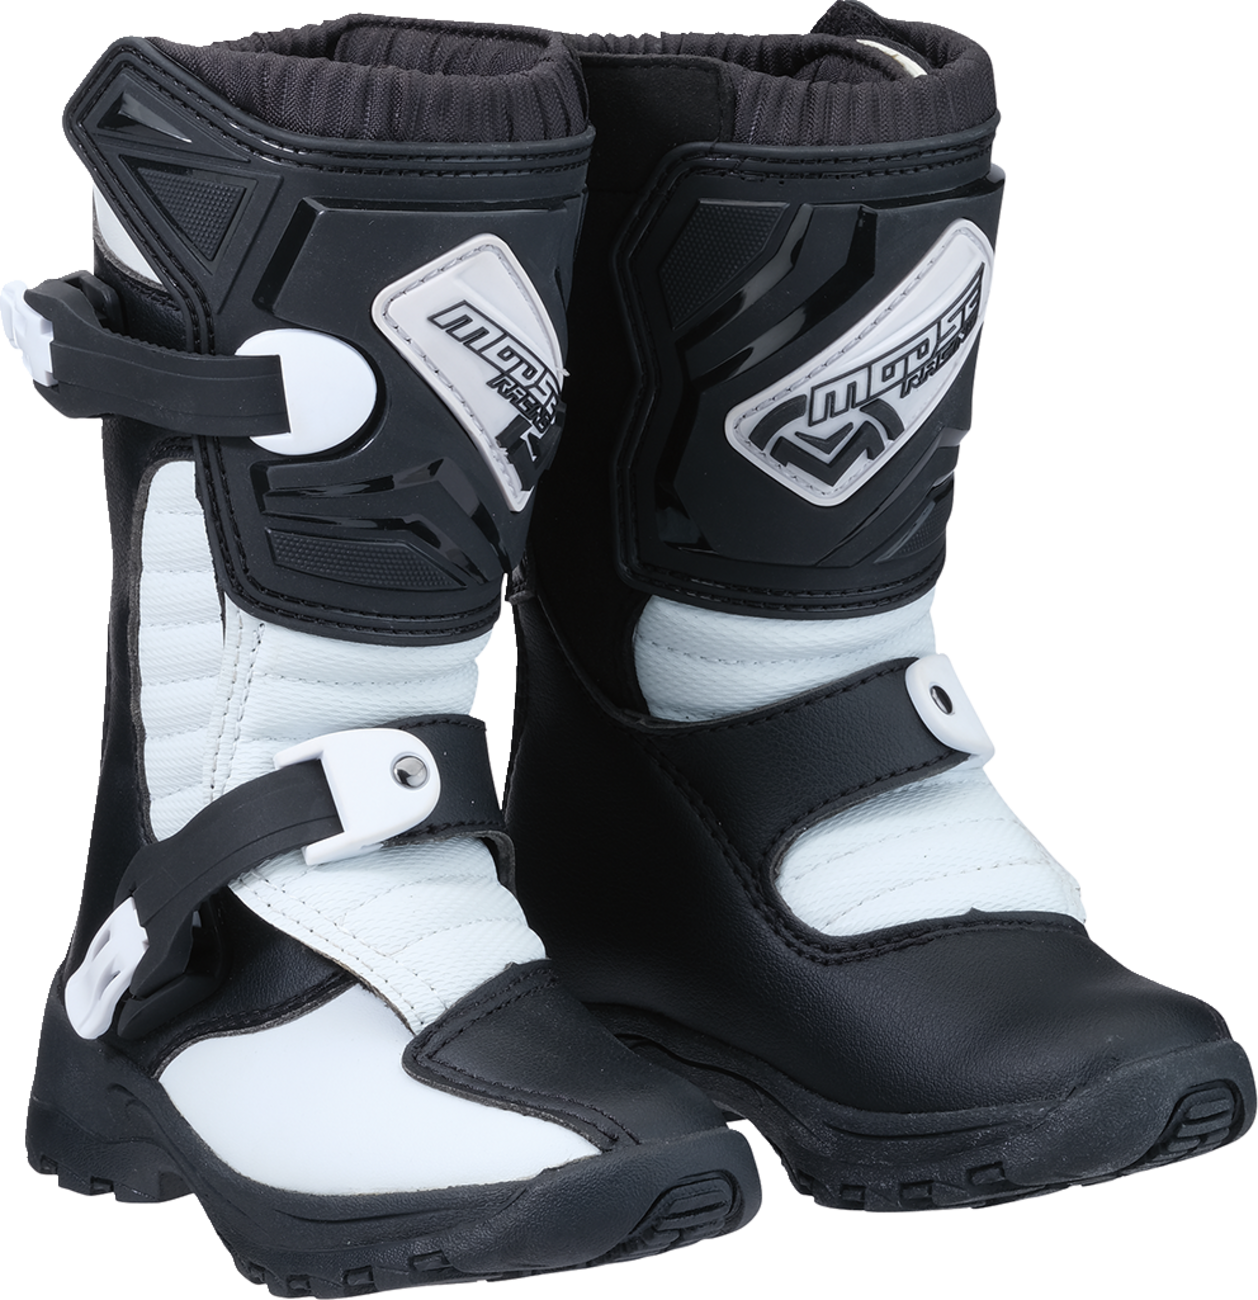 MOOSE RACING M1.3 Boots - Black/White - Size 6 3411-0435